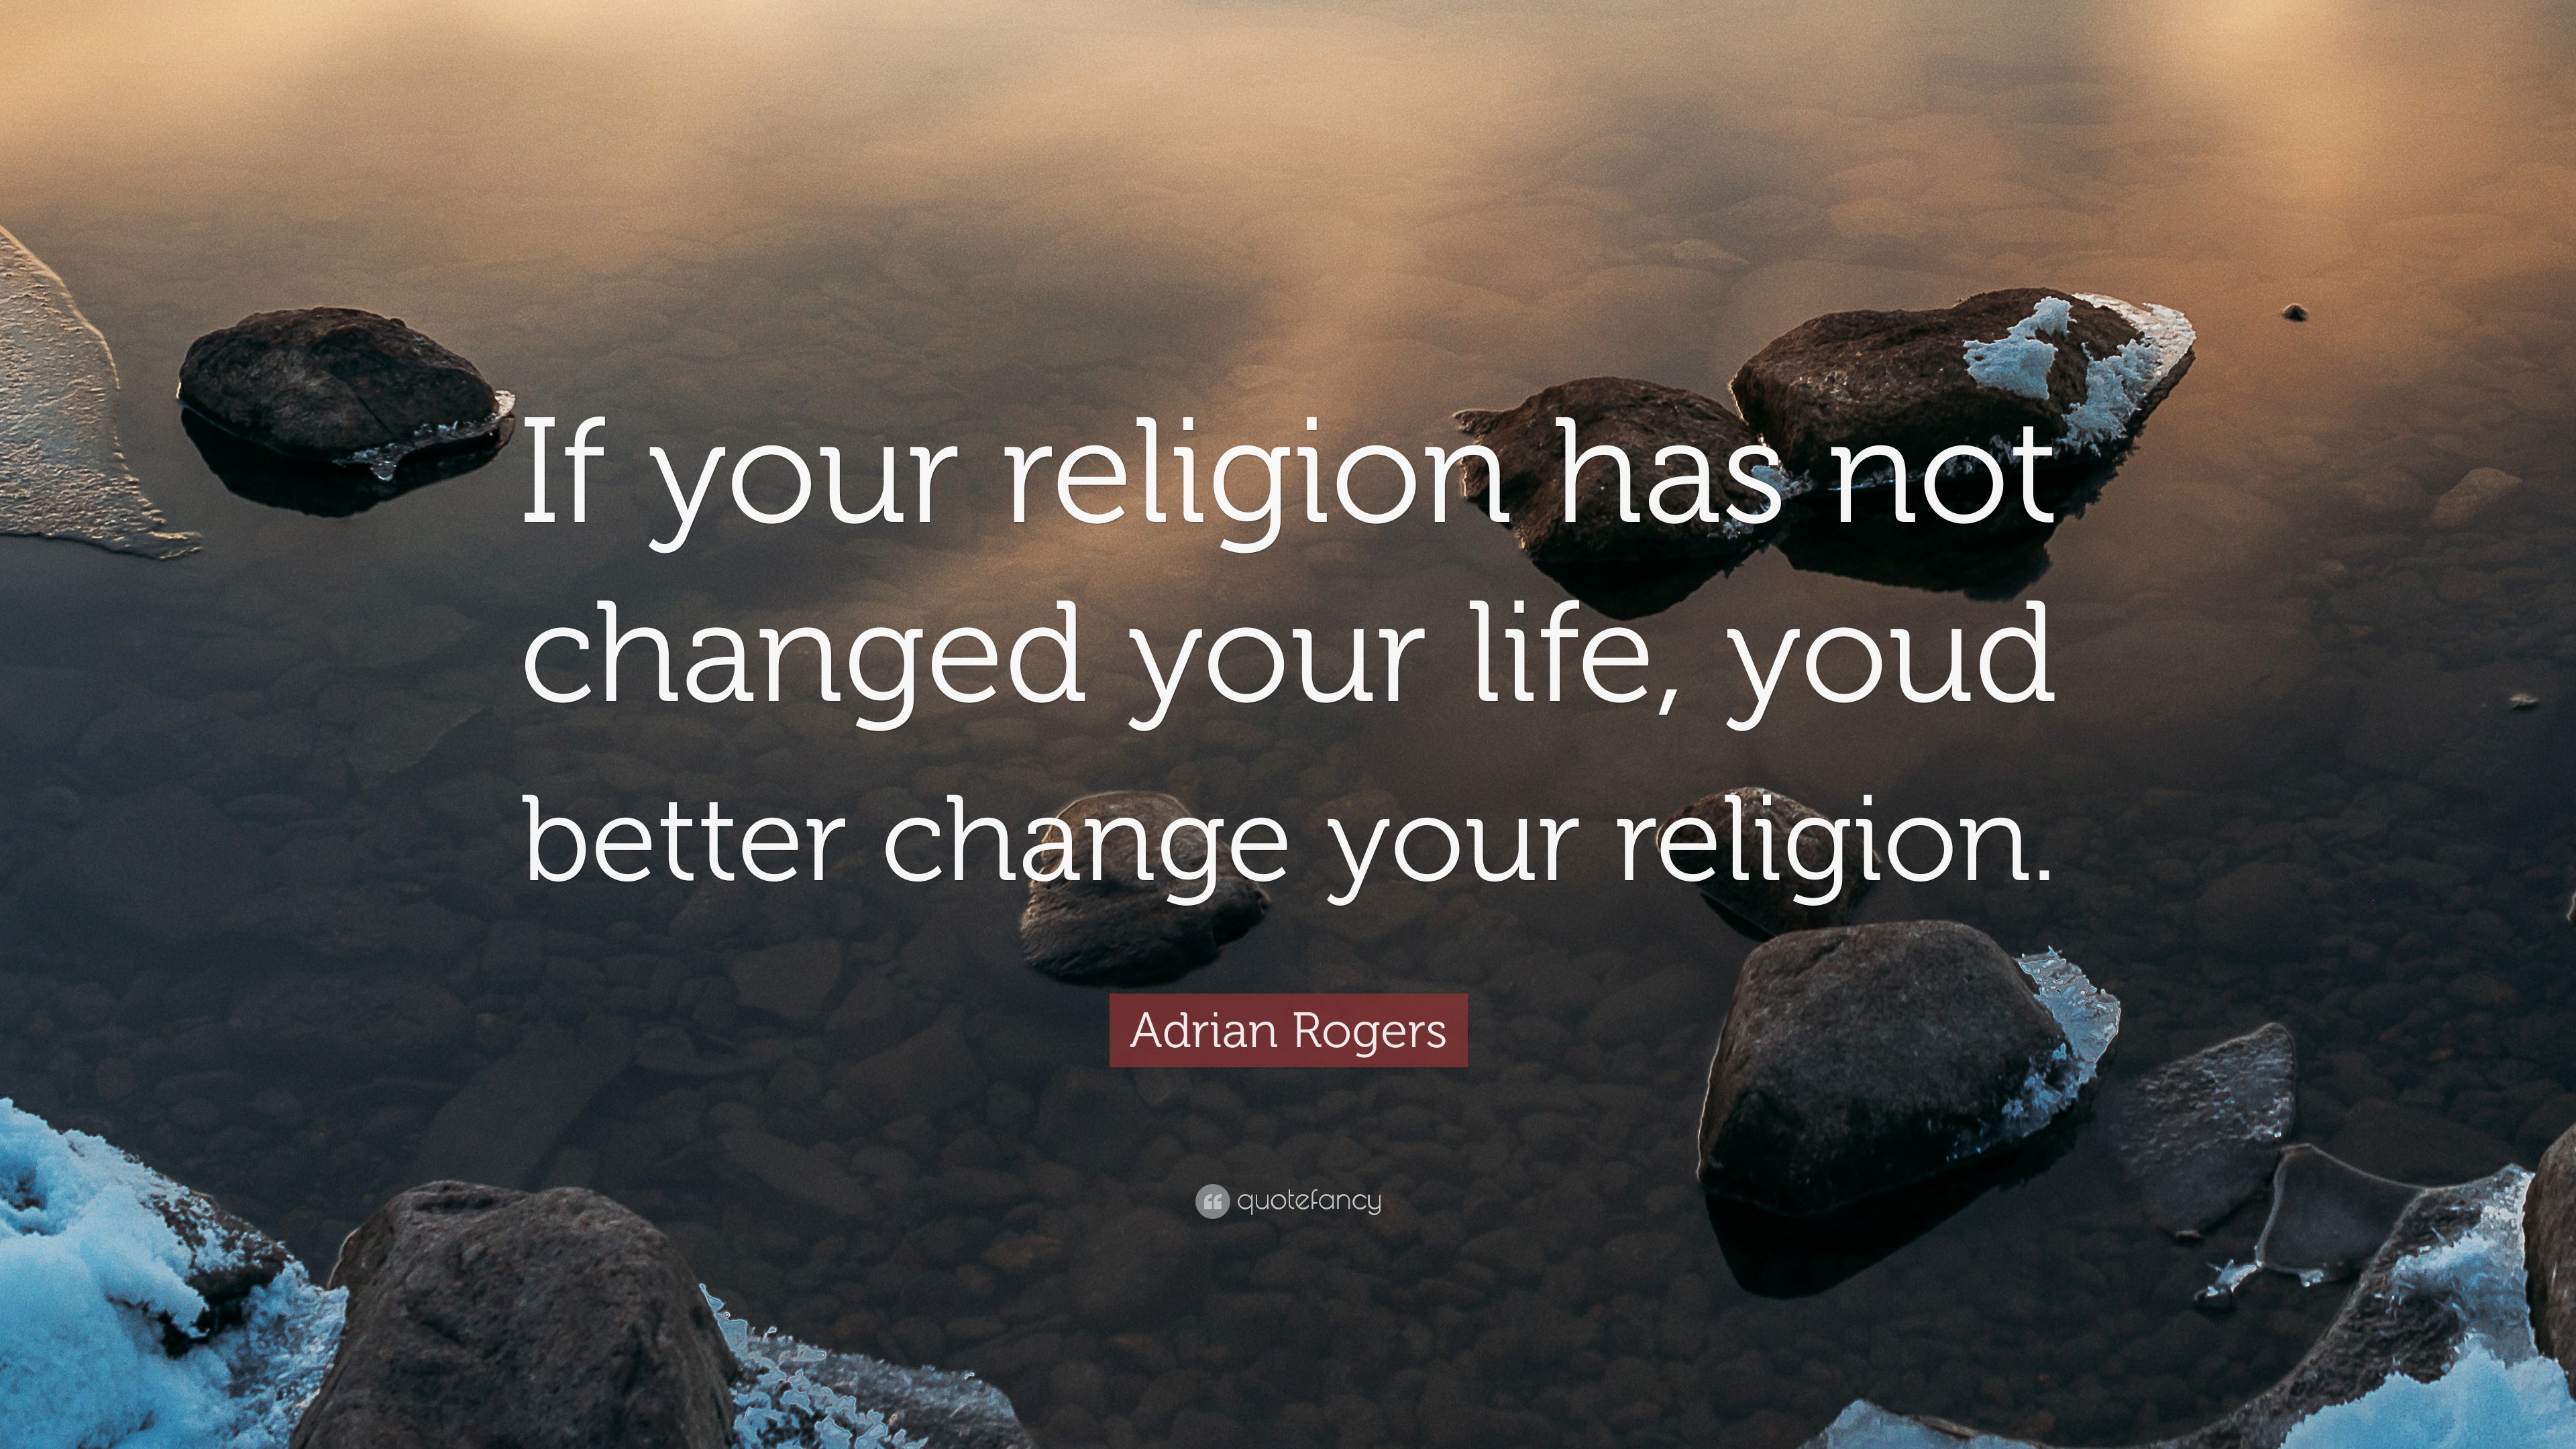 Adrian Rogers Quote: “If your religion has not changed your life, youd ...